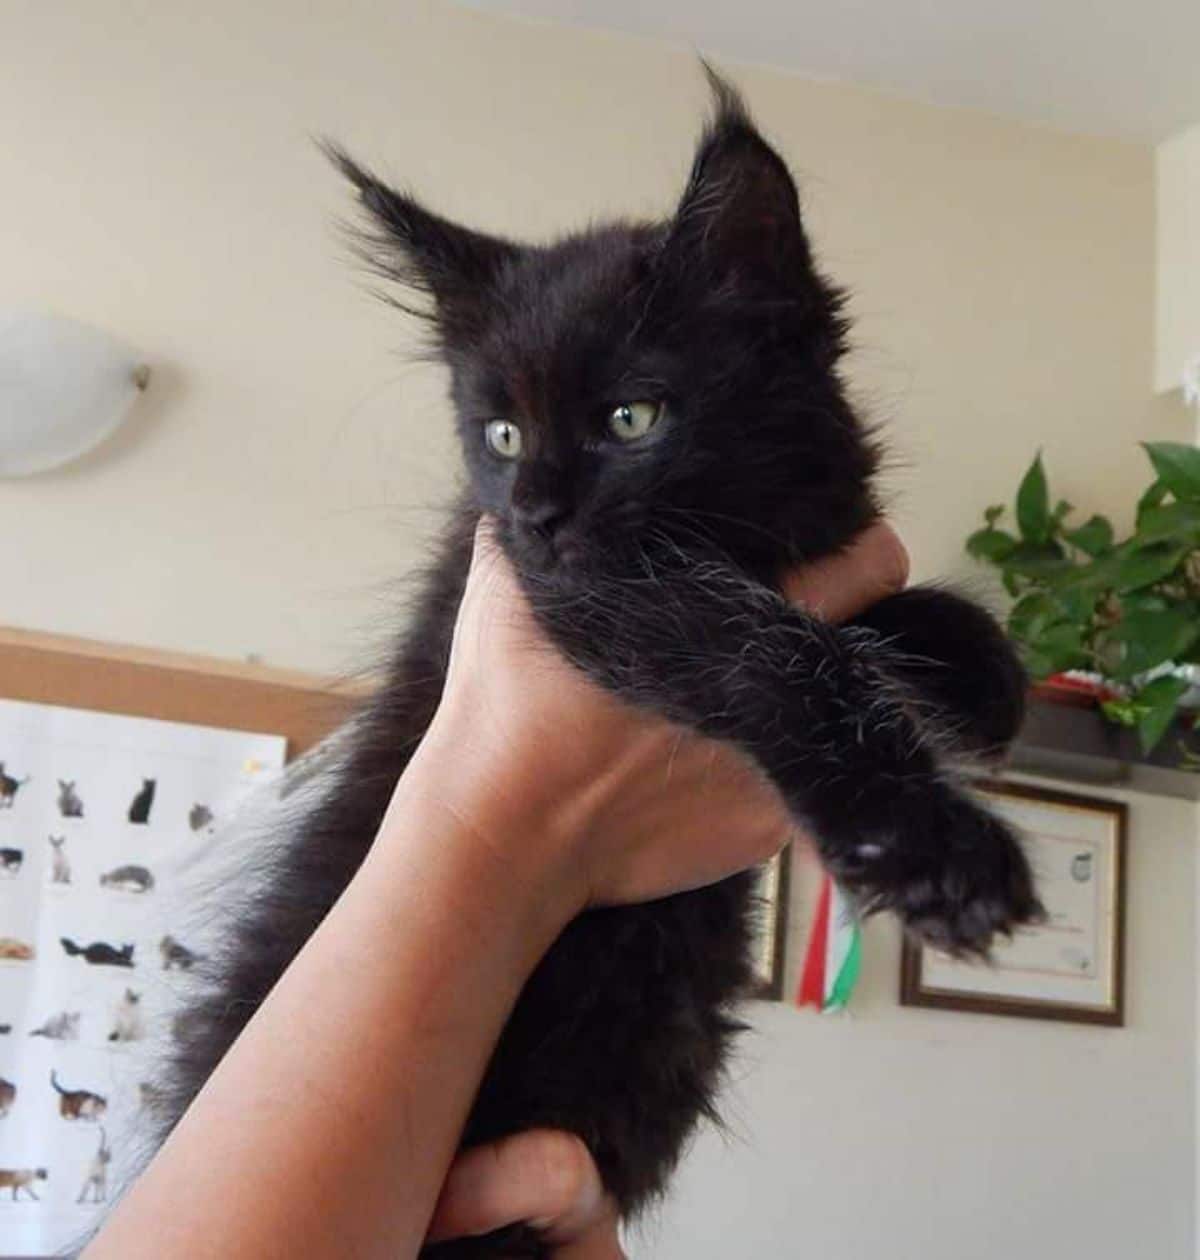 Hands holding a cute black maine coon kitten in the air.